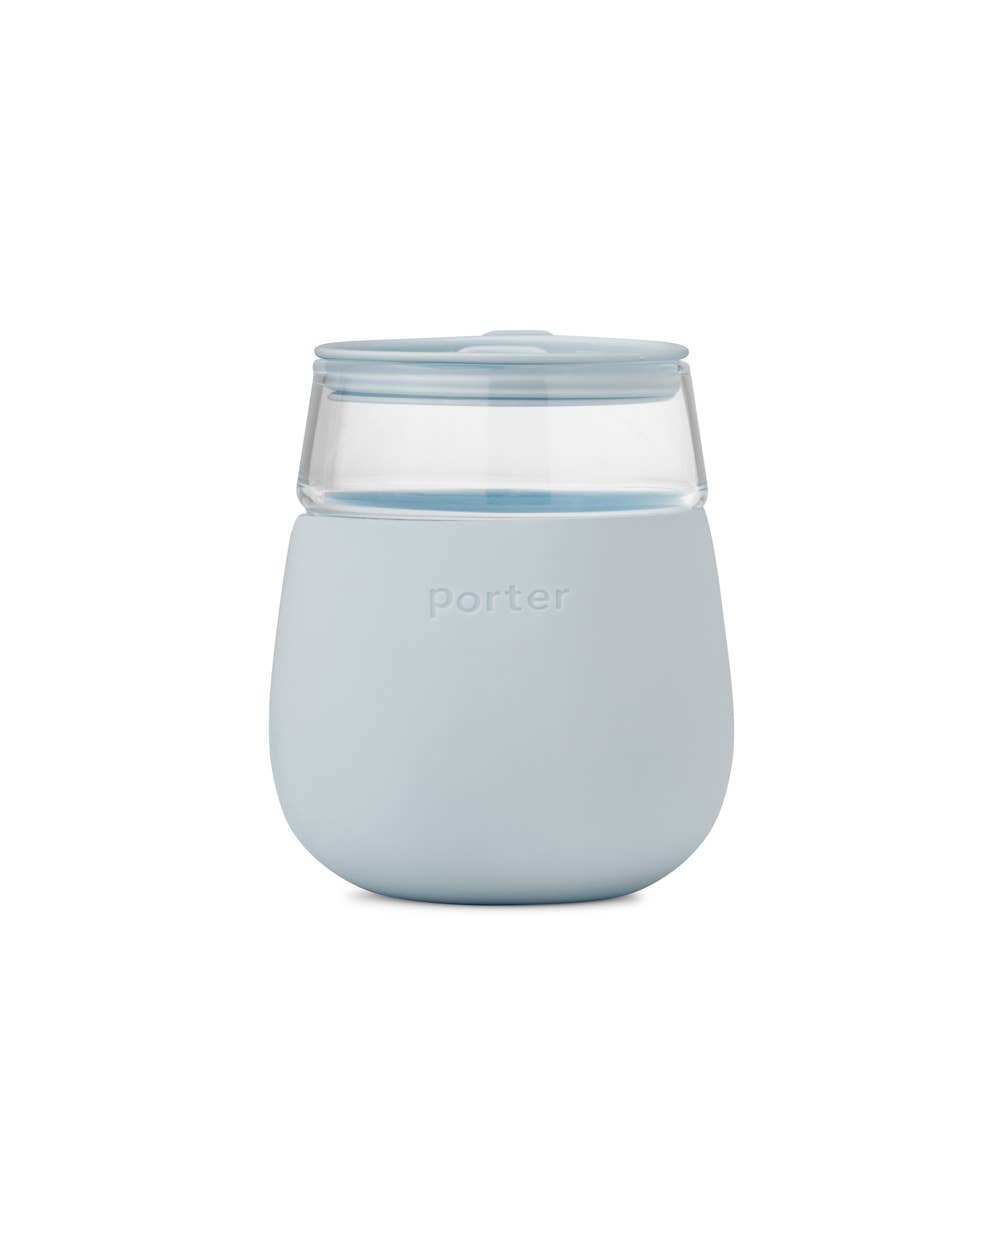 Porter Wine & Drink Glass Cup with Silicone Wrap